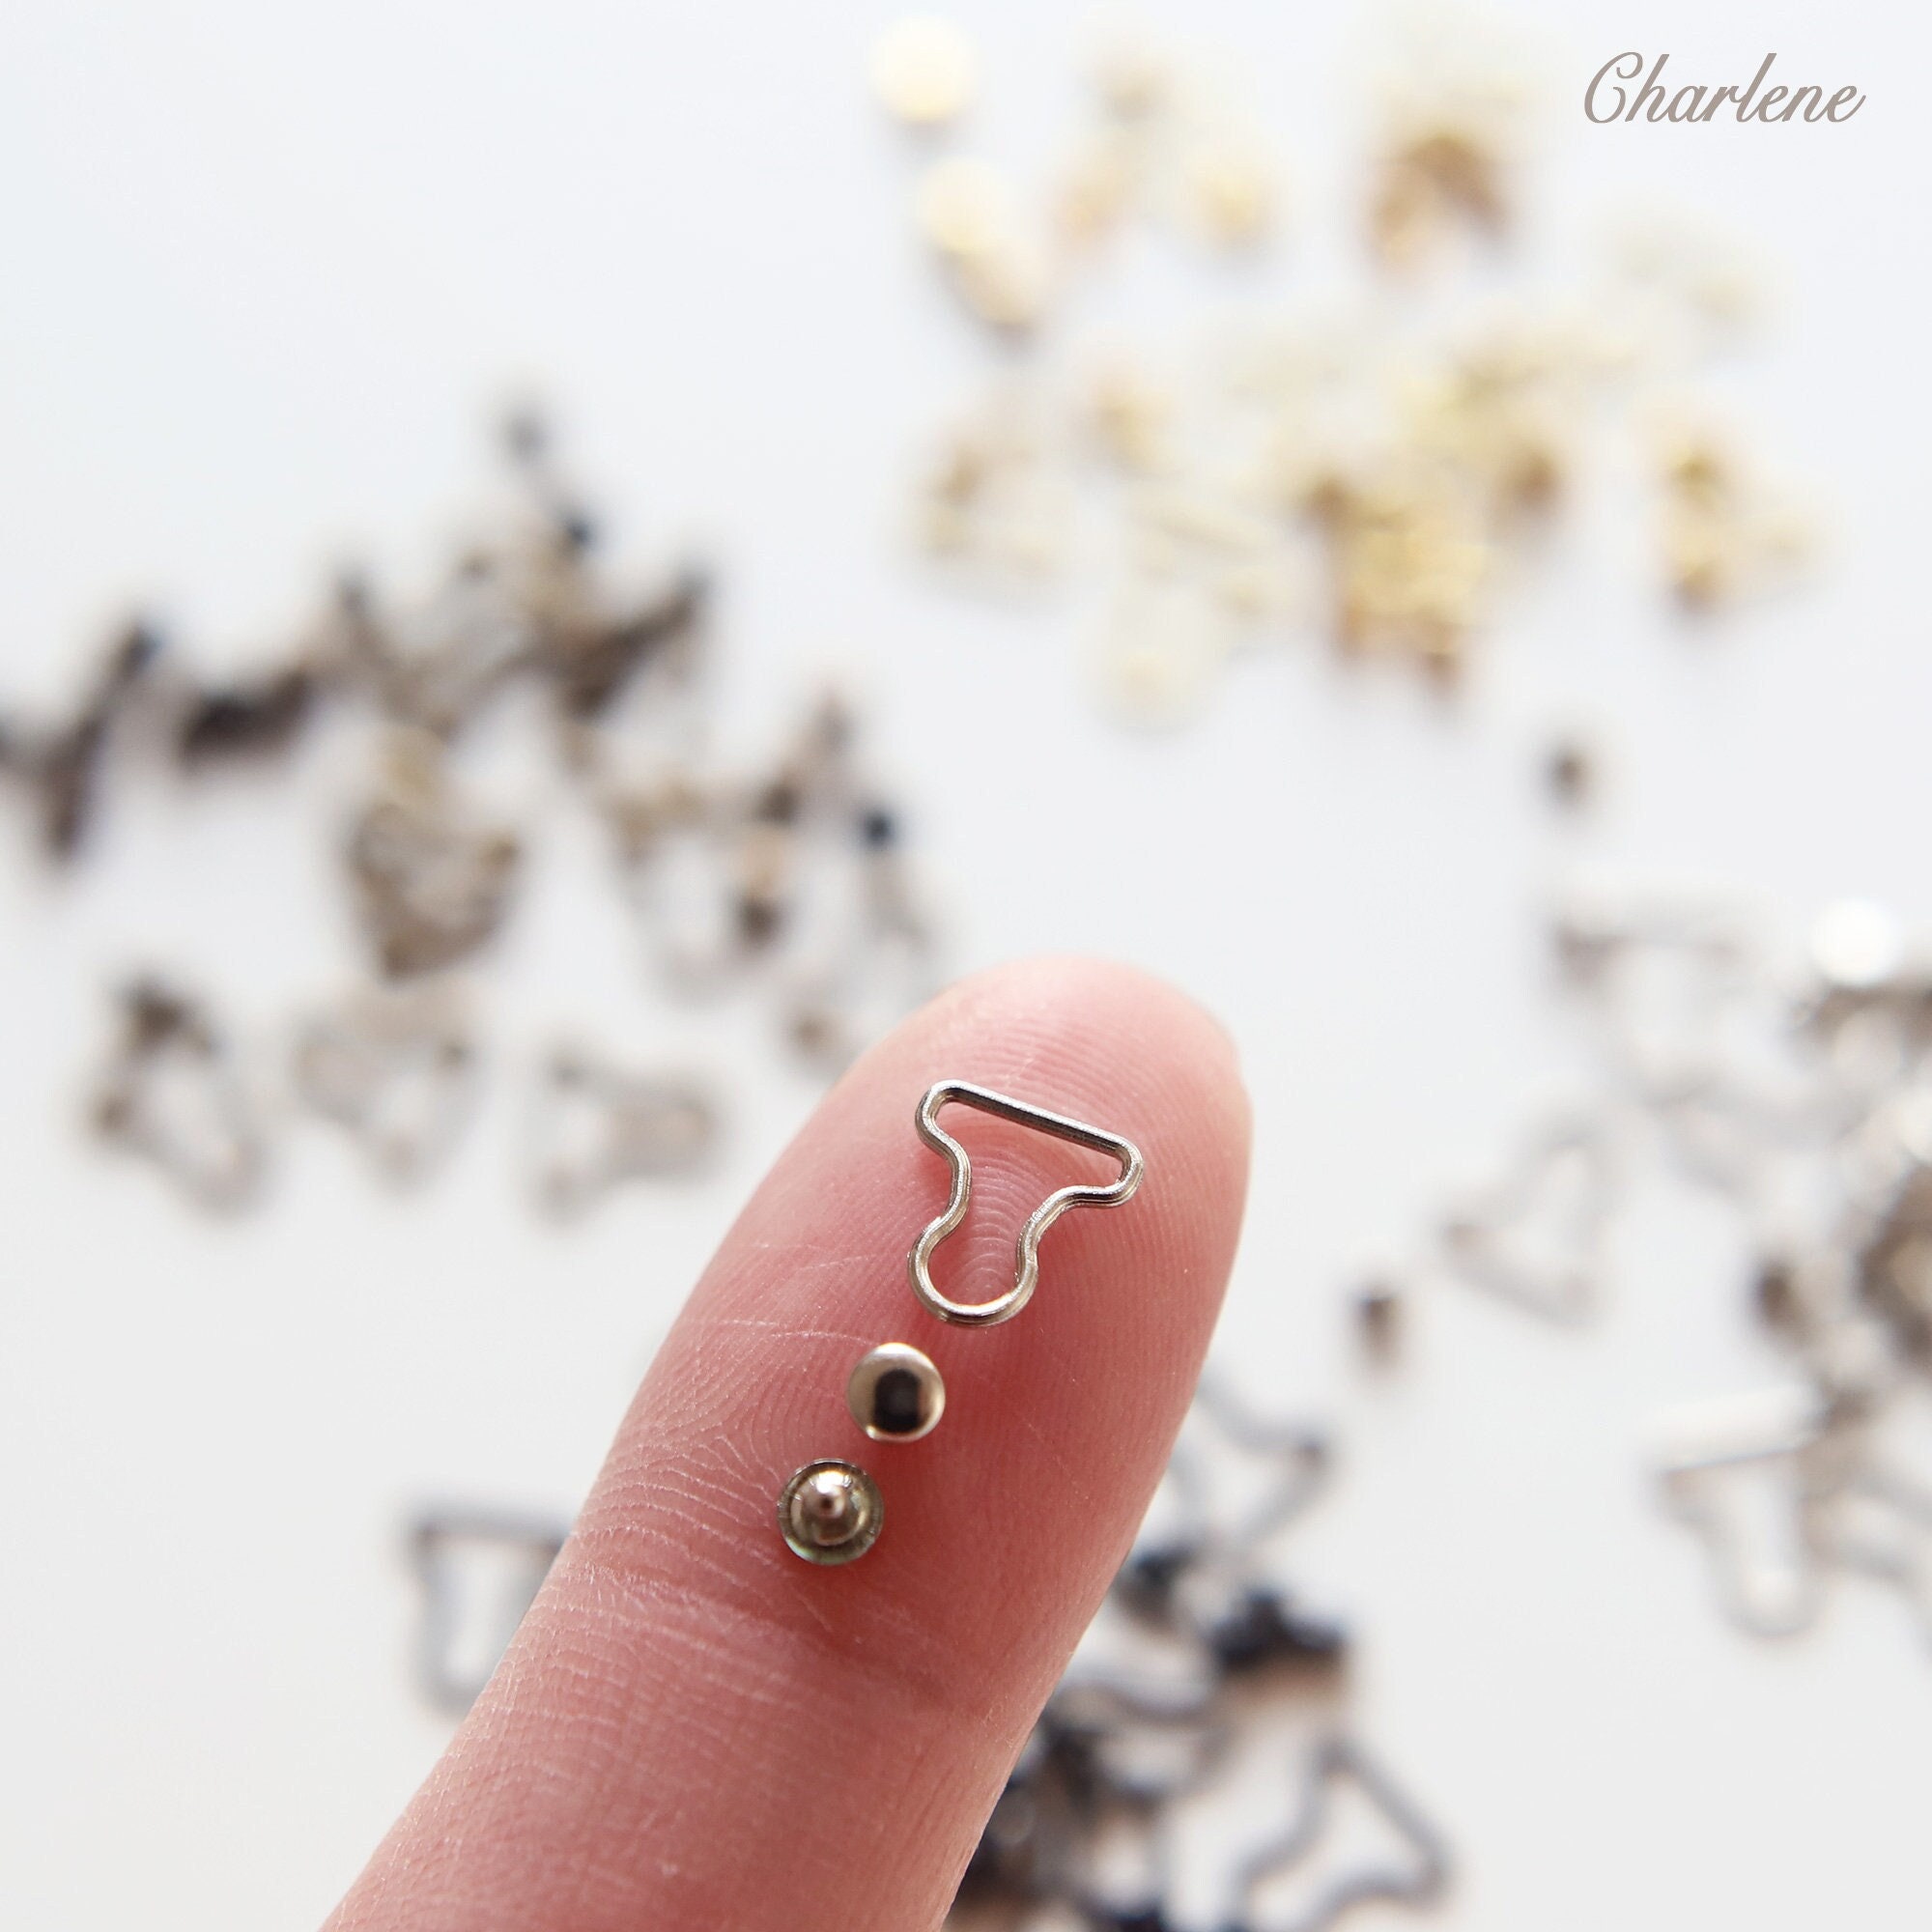 10 PCS 8mm inner Diameter Tiny Overall Buckles and Studs, in 4 Colors, for  Doll Sewing Projects, Mini Craft Supply 